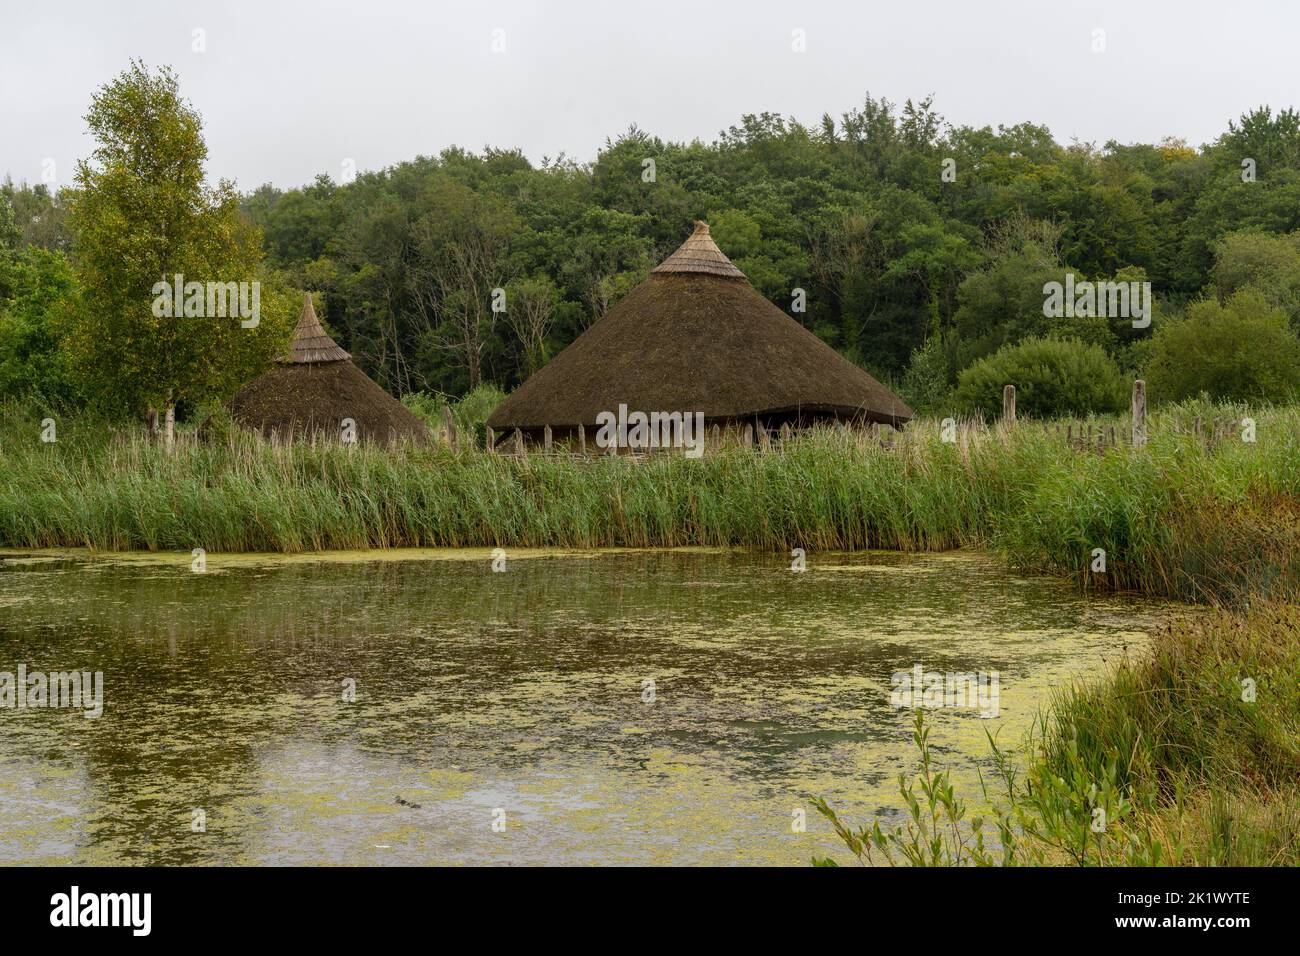 Wexford, Ireland - 18 August, 2022: view of a typical Crannog or artificial island in a lake in the Irish National Heritage Park Stock Photo